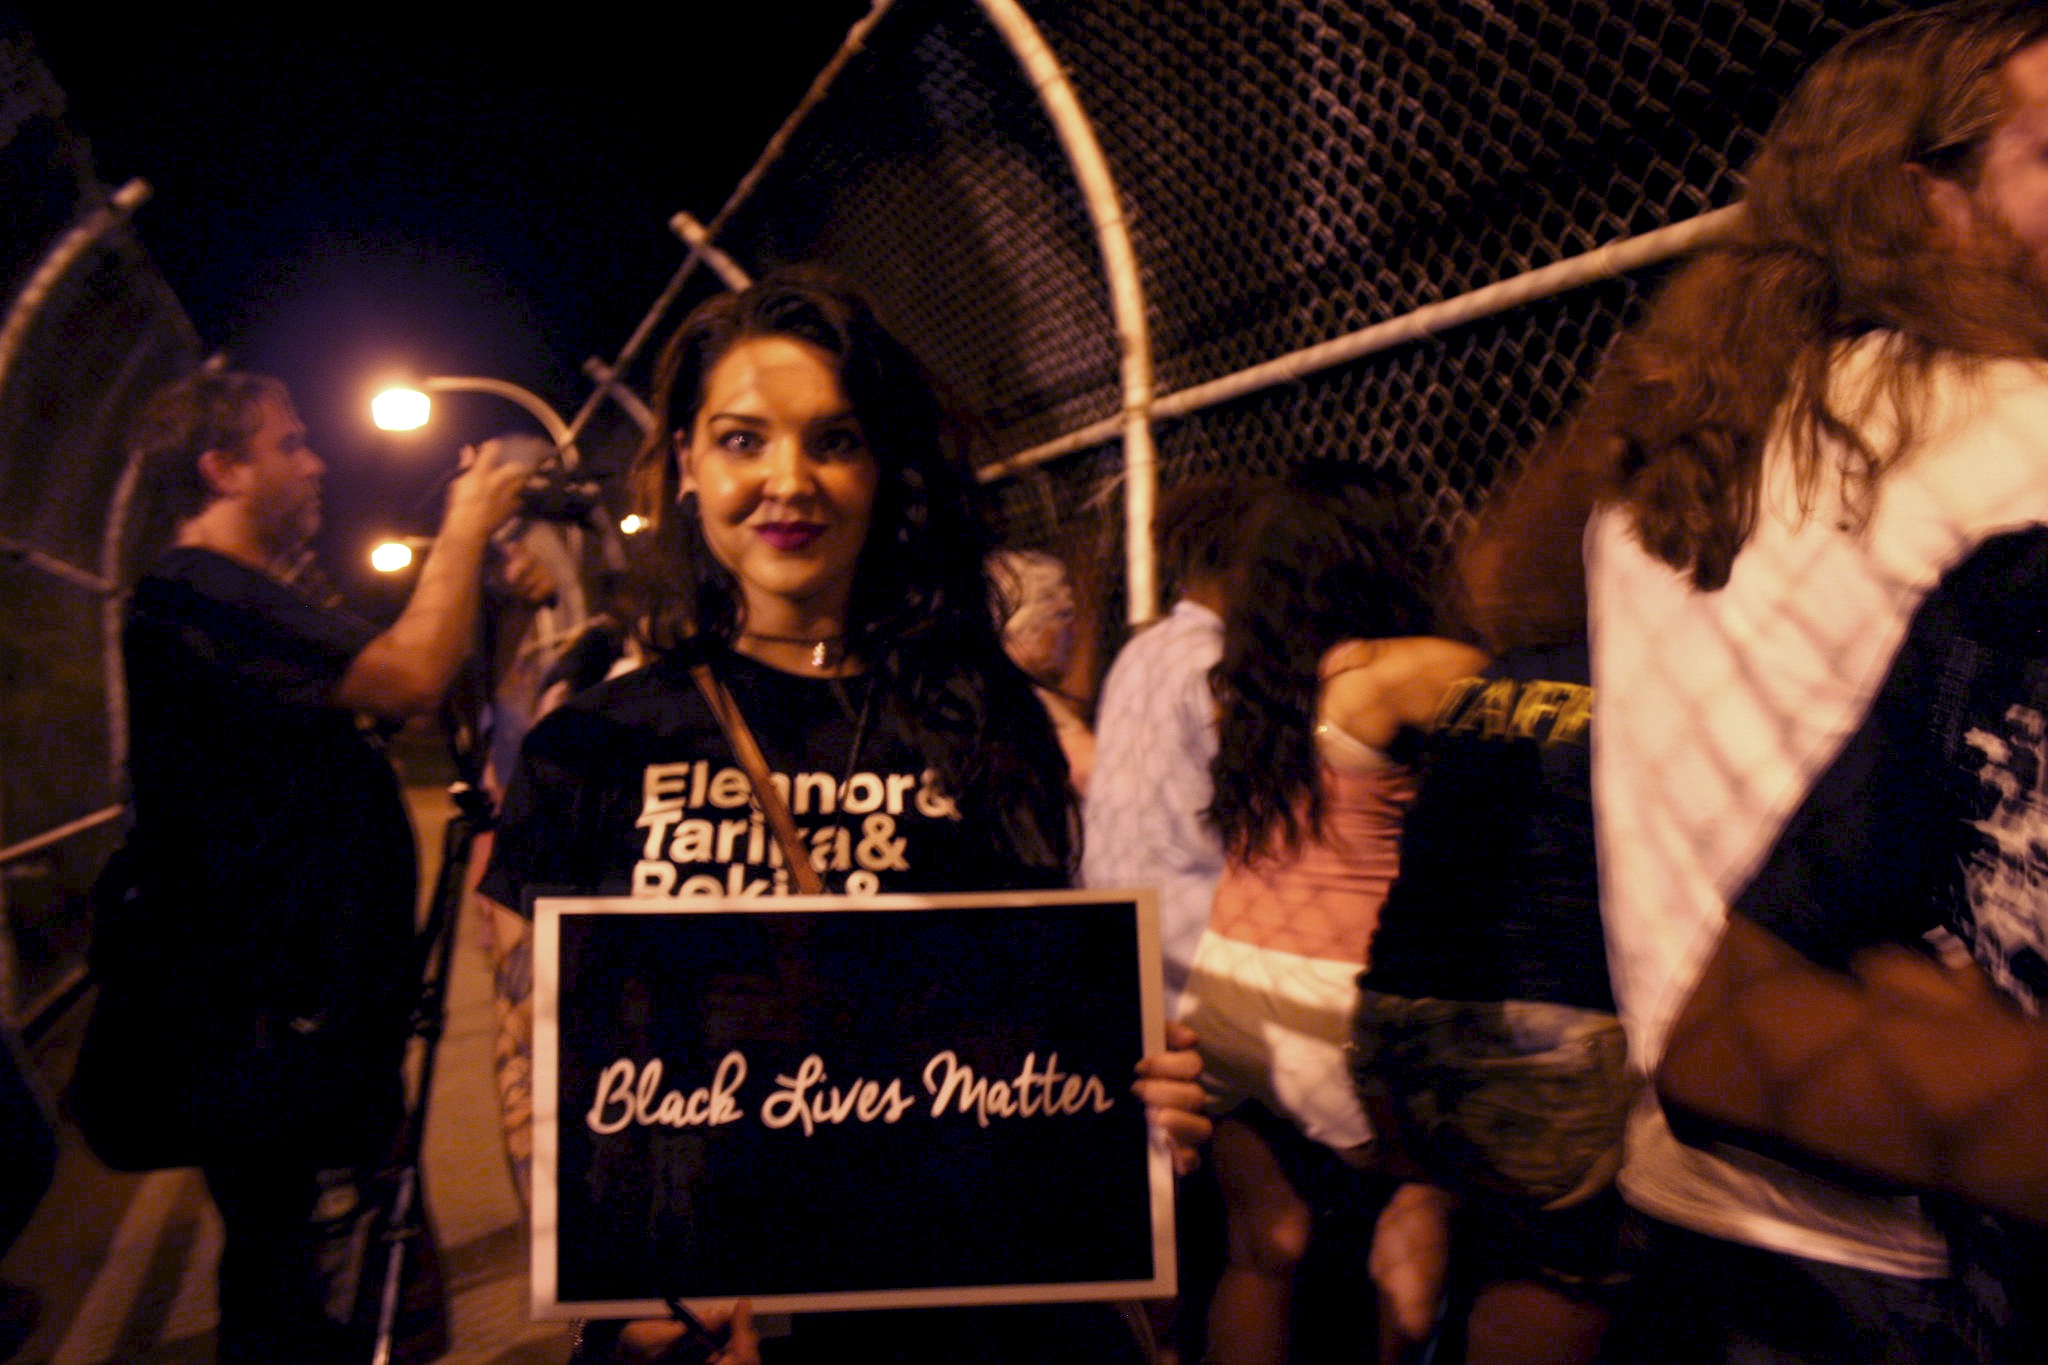 Claire Van Fossen holds a “Black Lives Matter” sign during the demonstration. (Photo by Jabril Faraj)